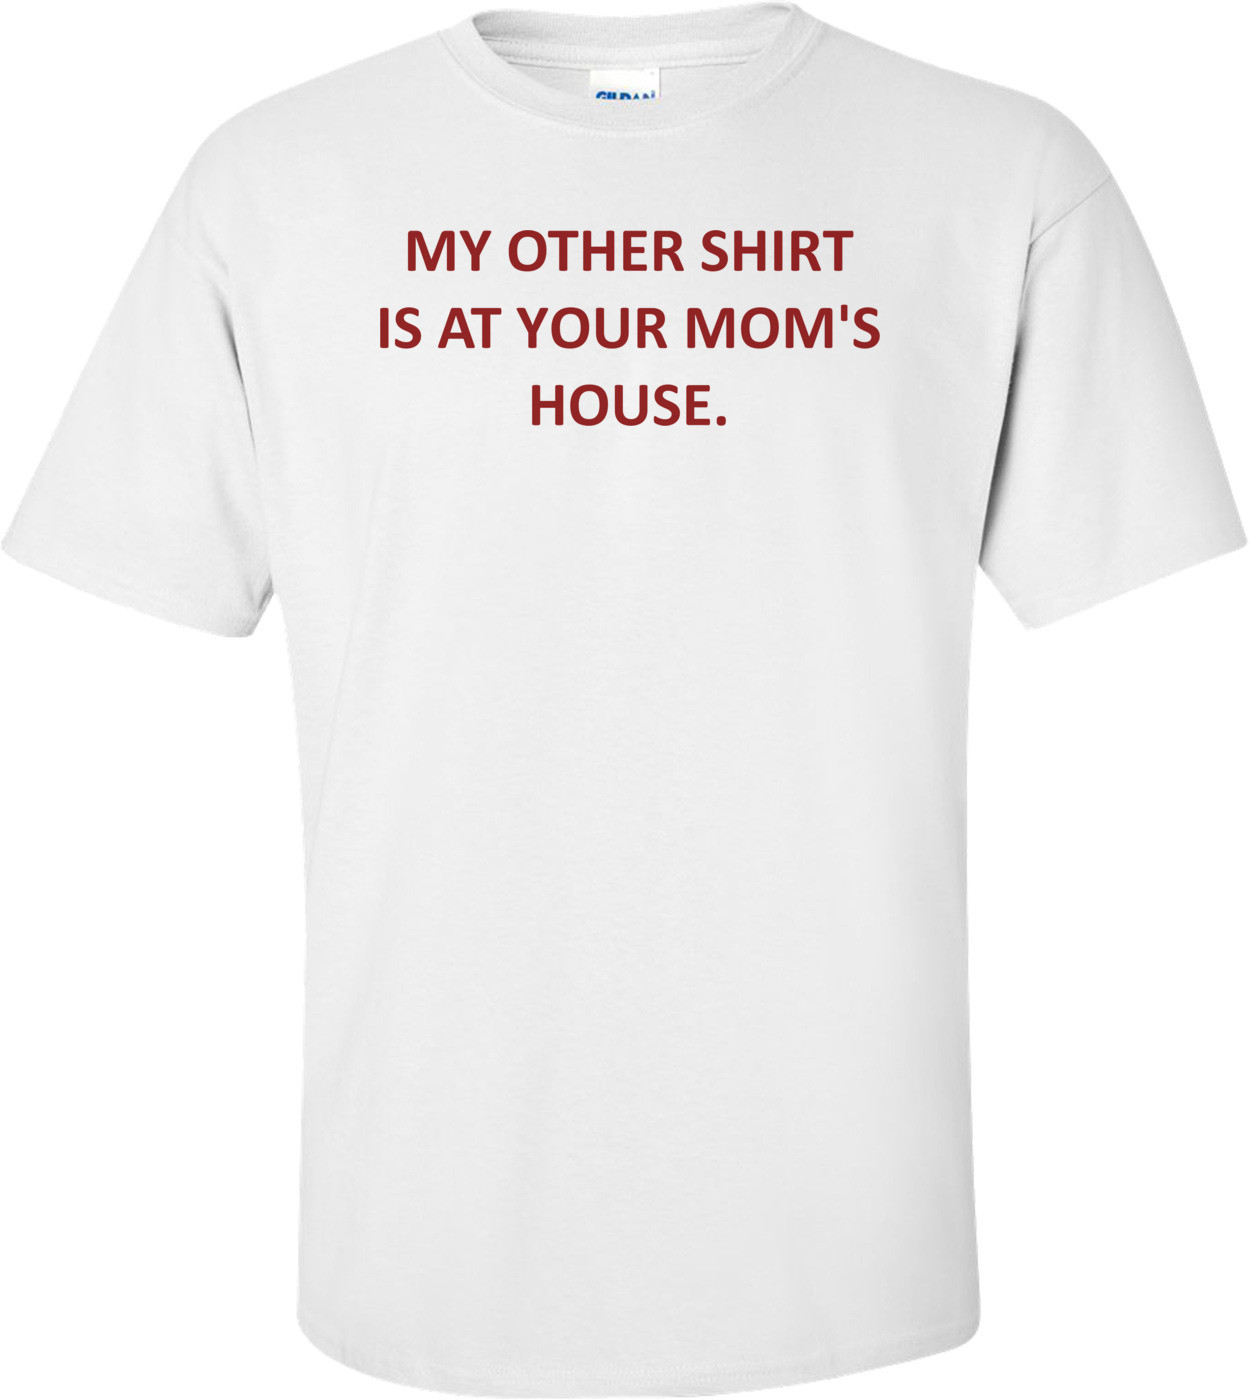 MY OTHER SHIRT IS AT YOUR MOM'S HOUSE. Shirt